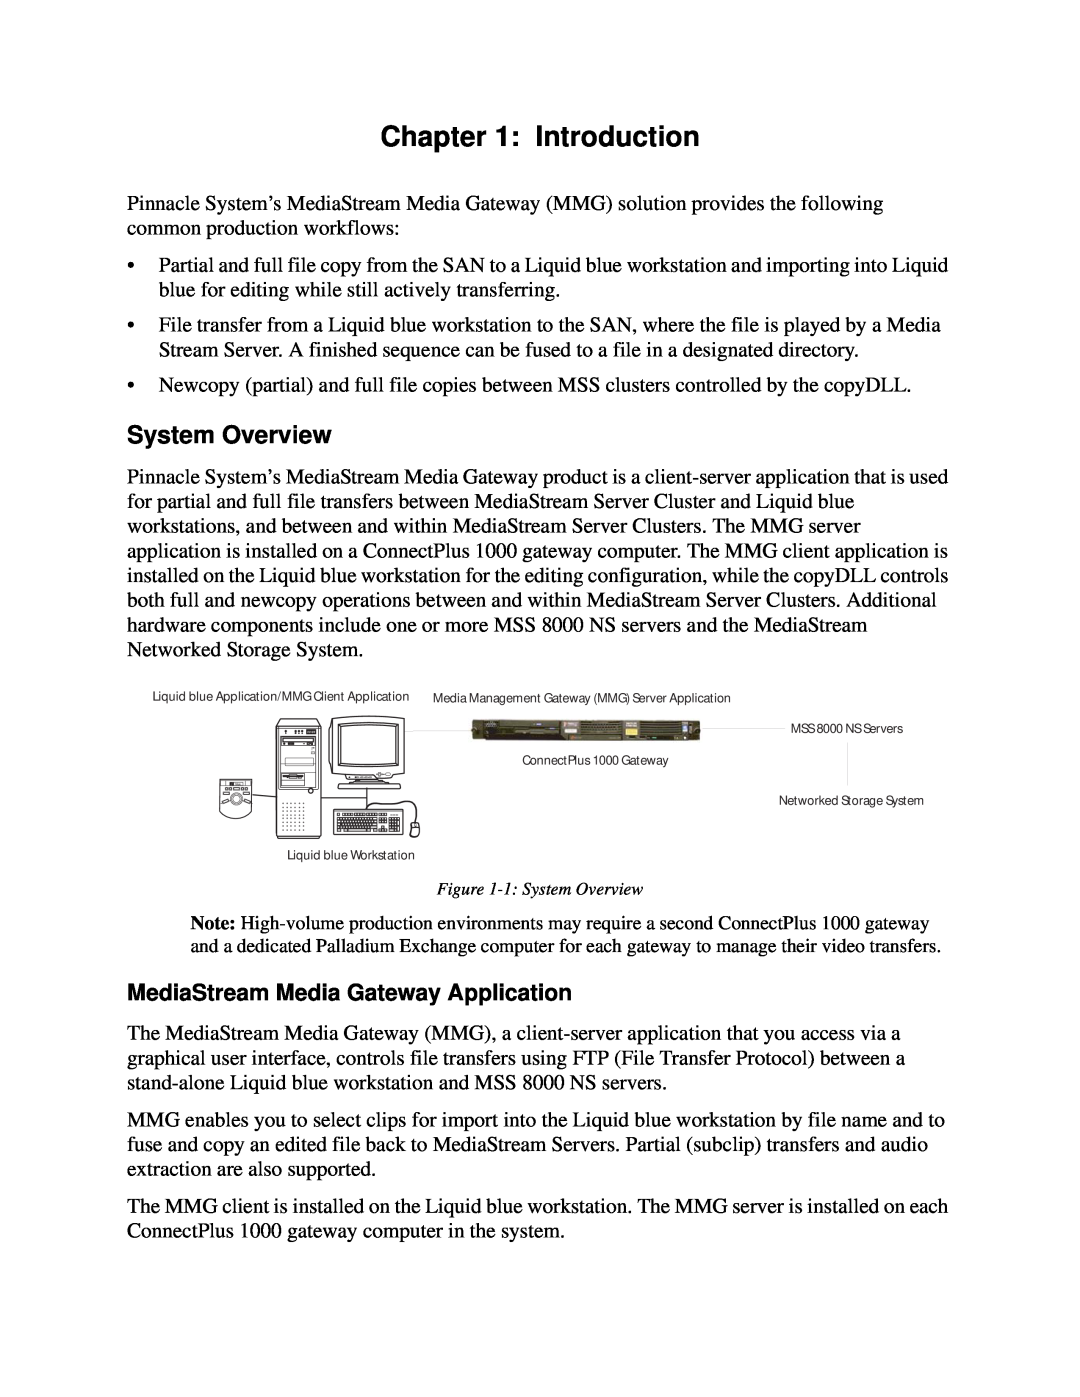 Pinnacle Design 37T100105 manual Introduction, System Overview, MediaStream Media Gateway Application 